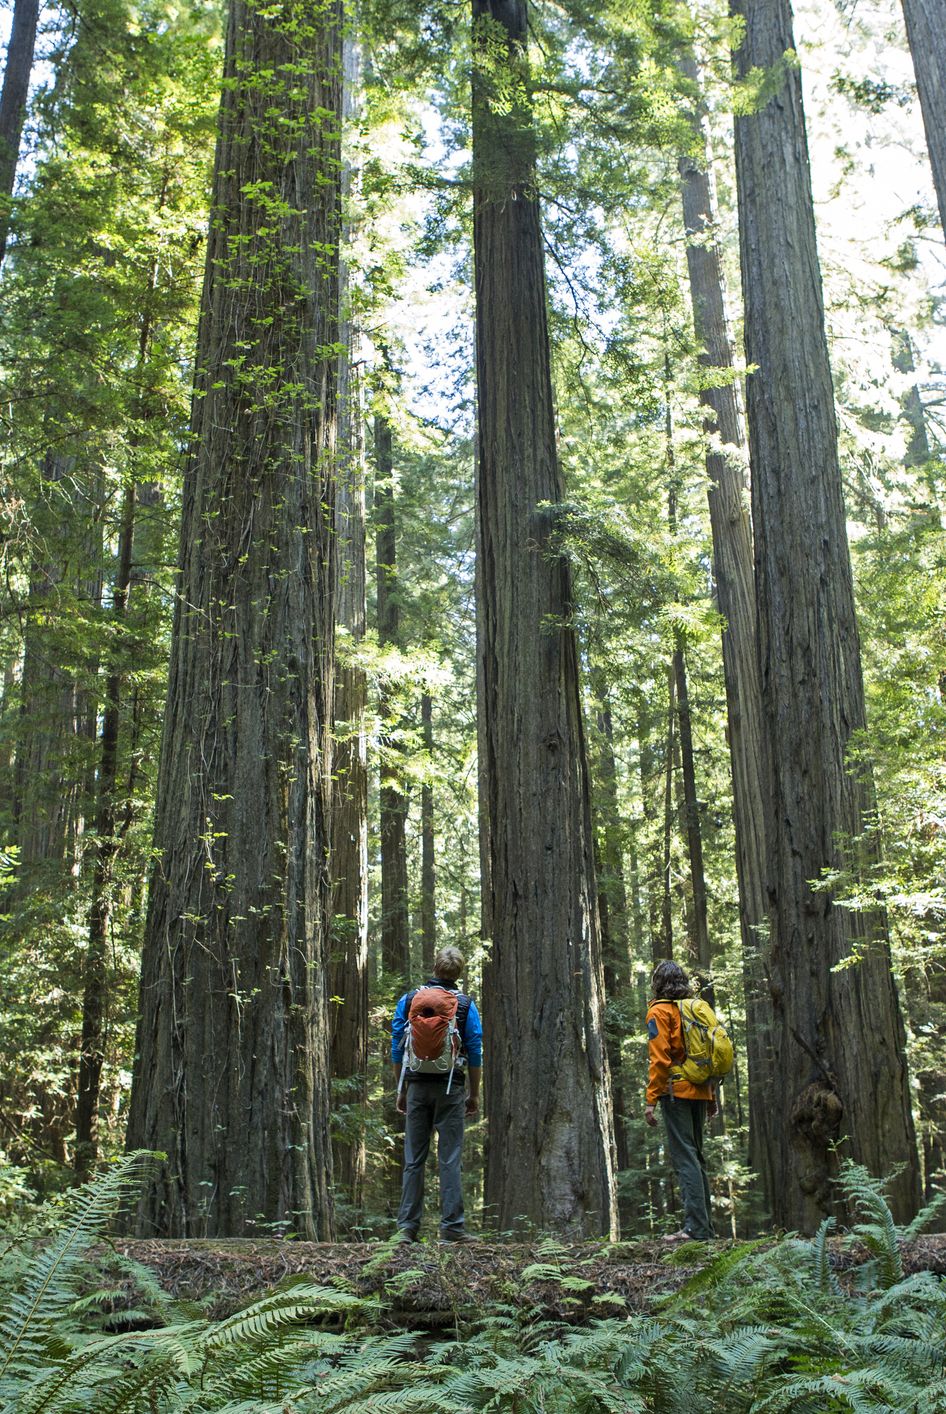 50 Best Hiking Trails in America - Top-Rated Hikes in Every State